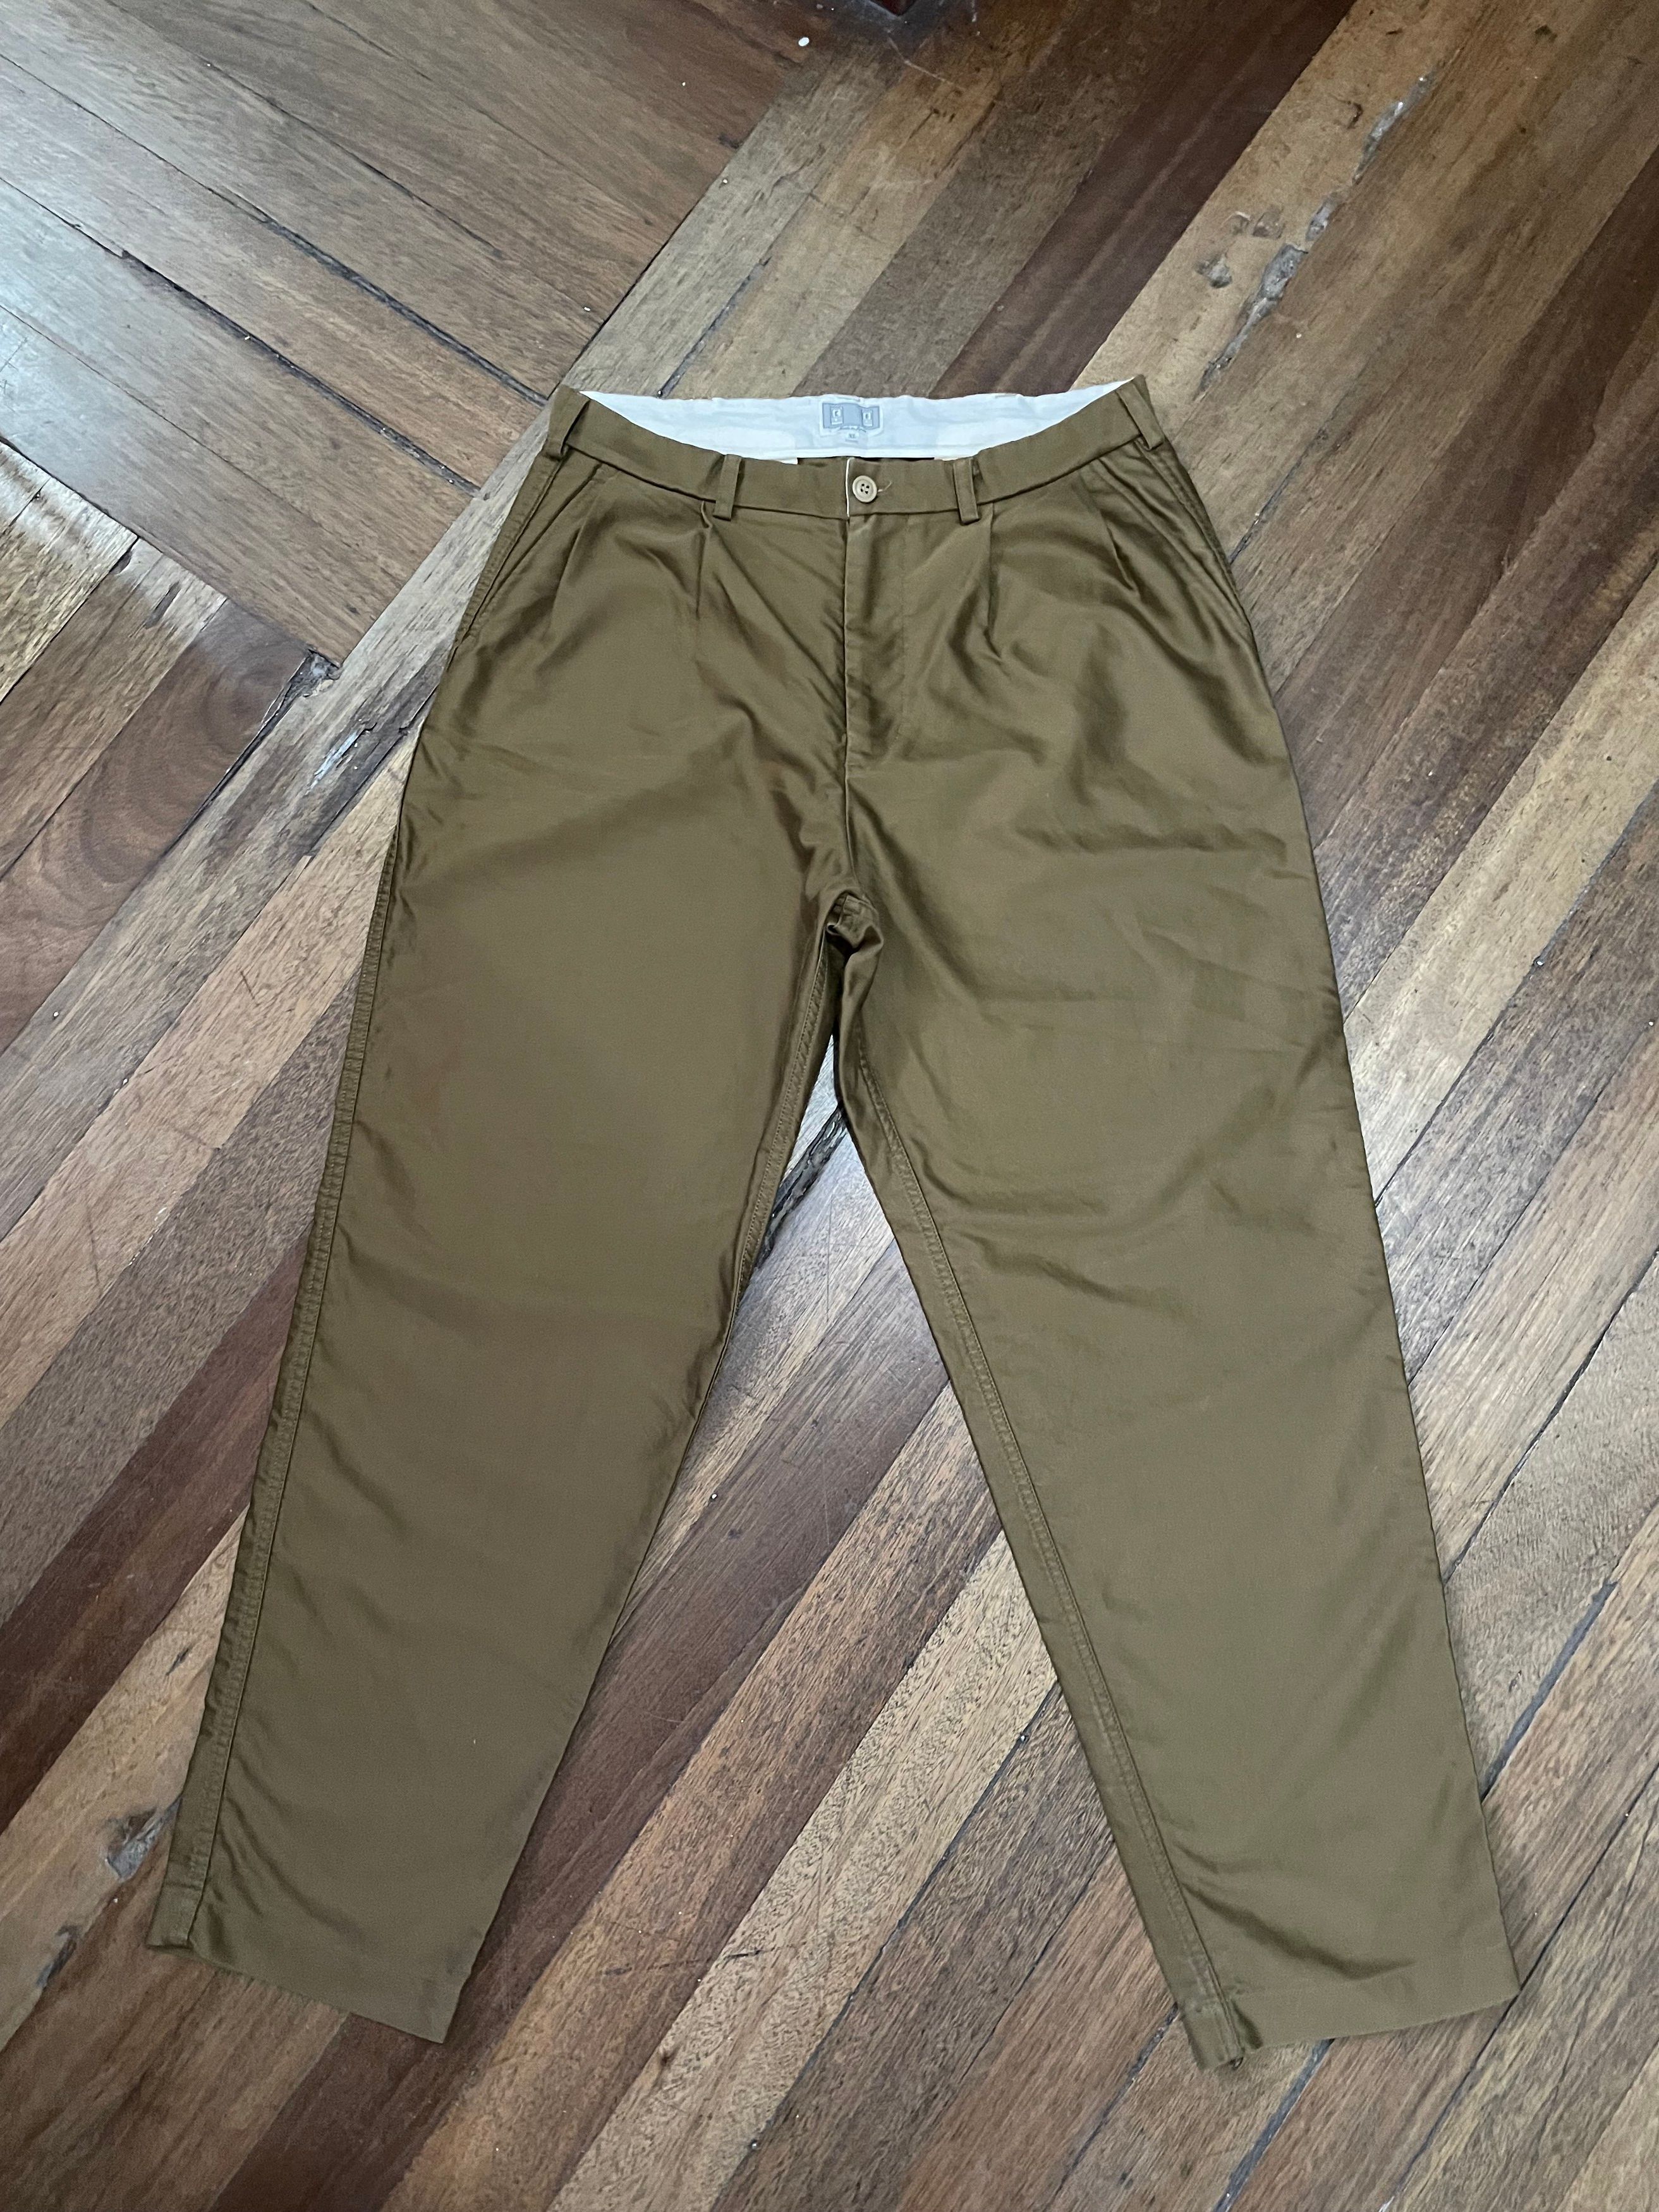 image of Cav Empt One Tuck Pant - Chino Brown, Men's (Size 34)